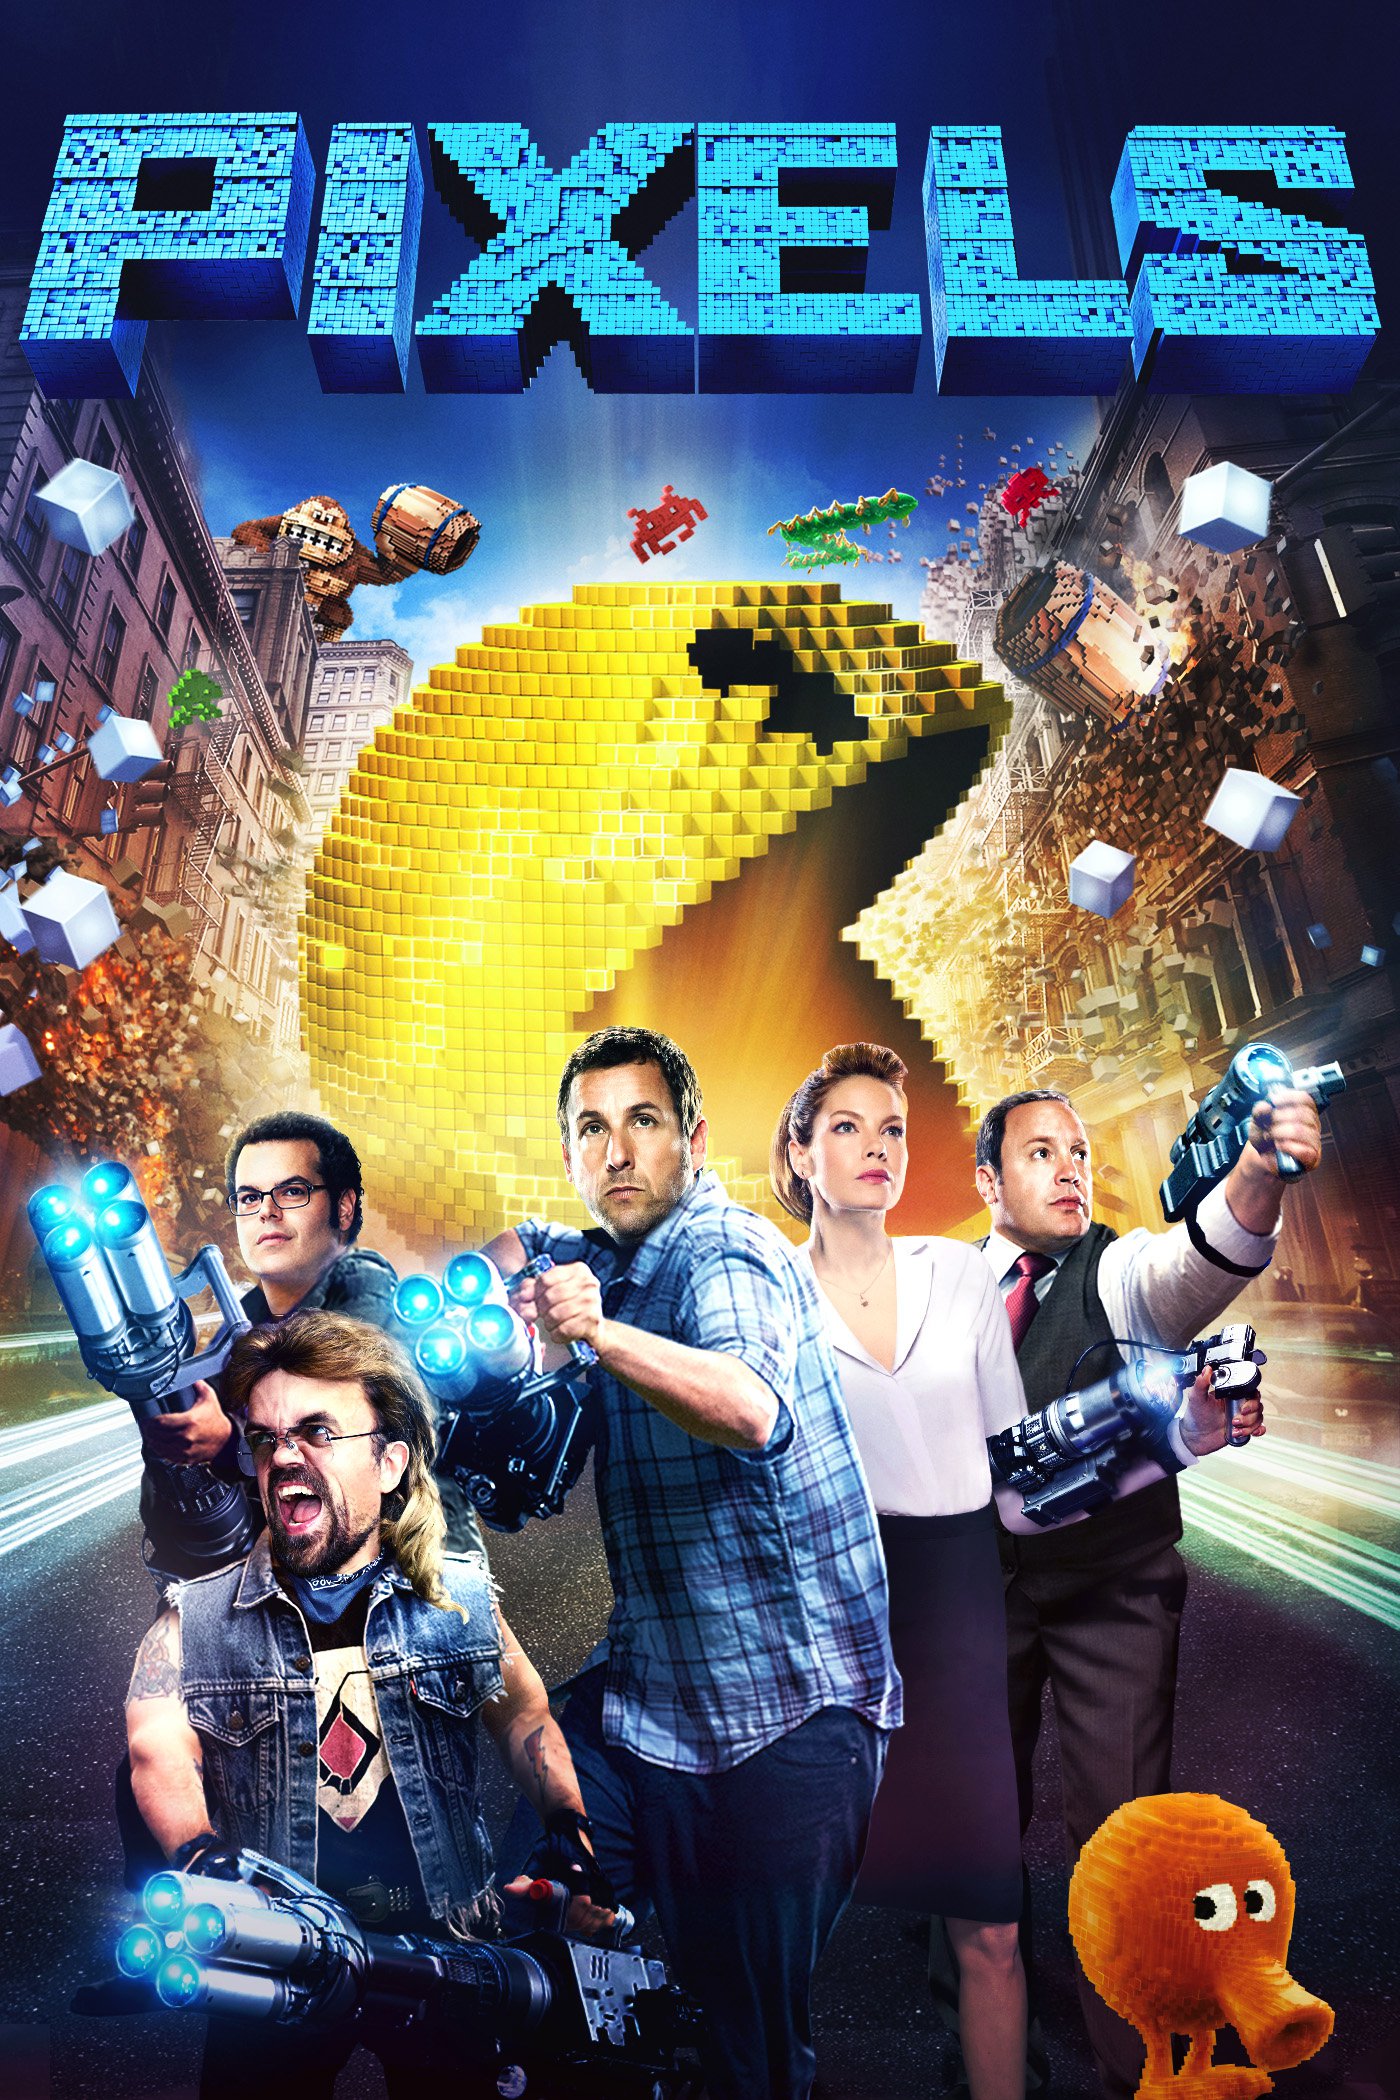 Poster for the movie "Pixels"